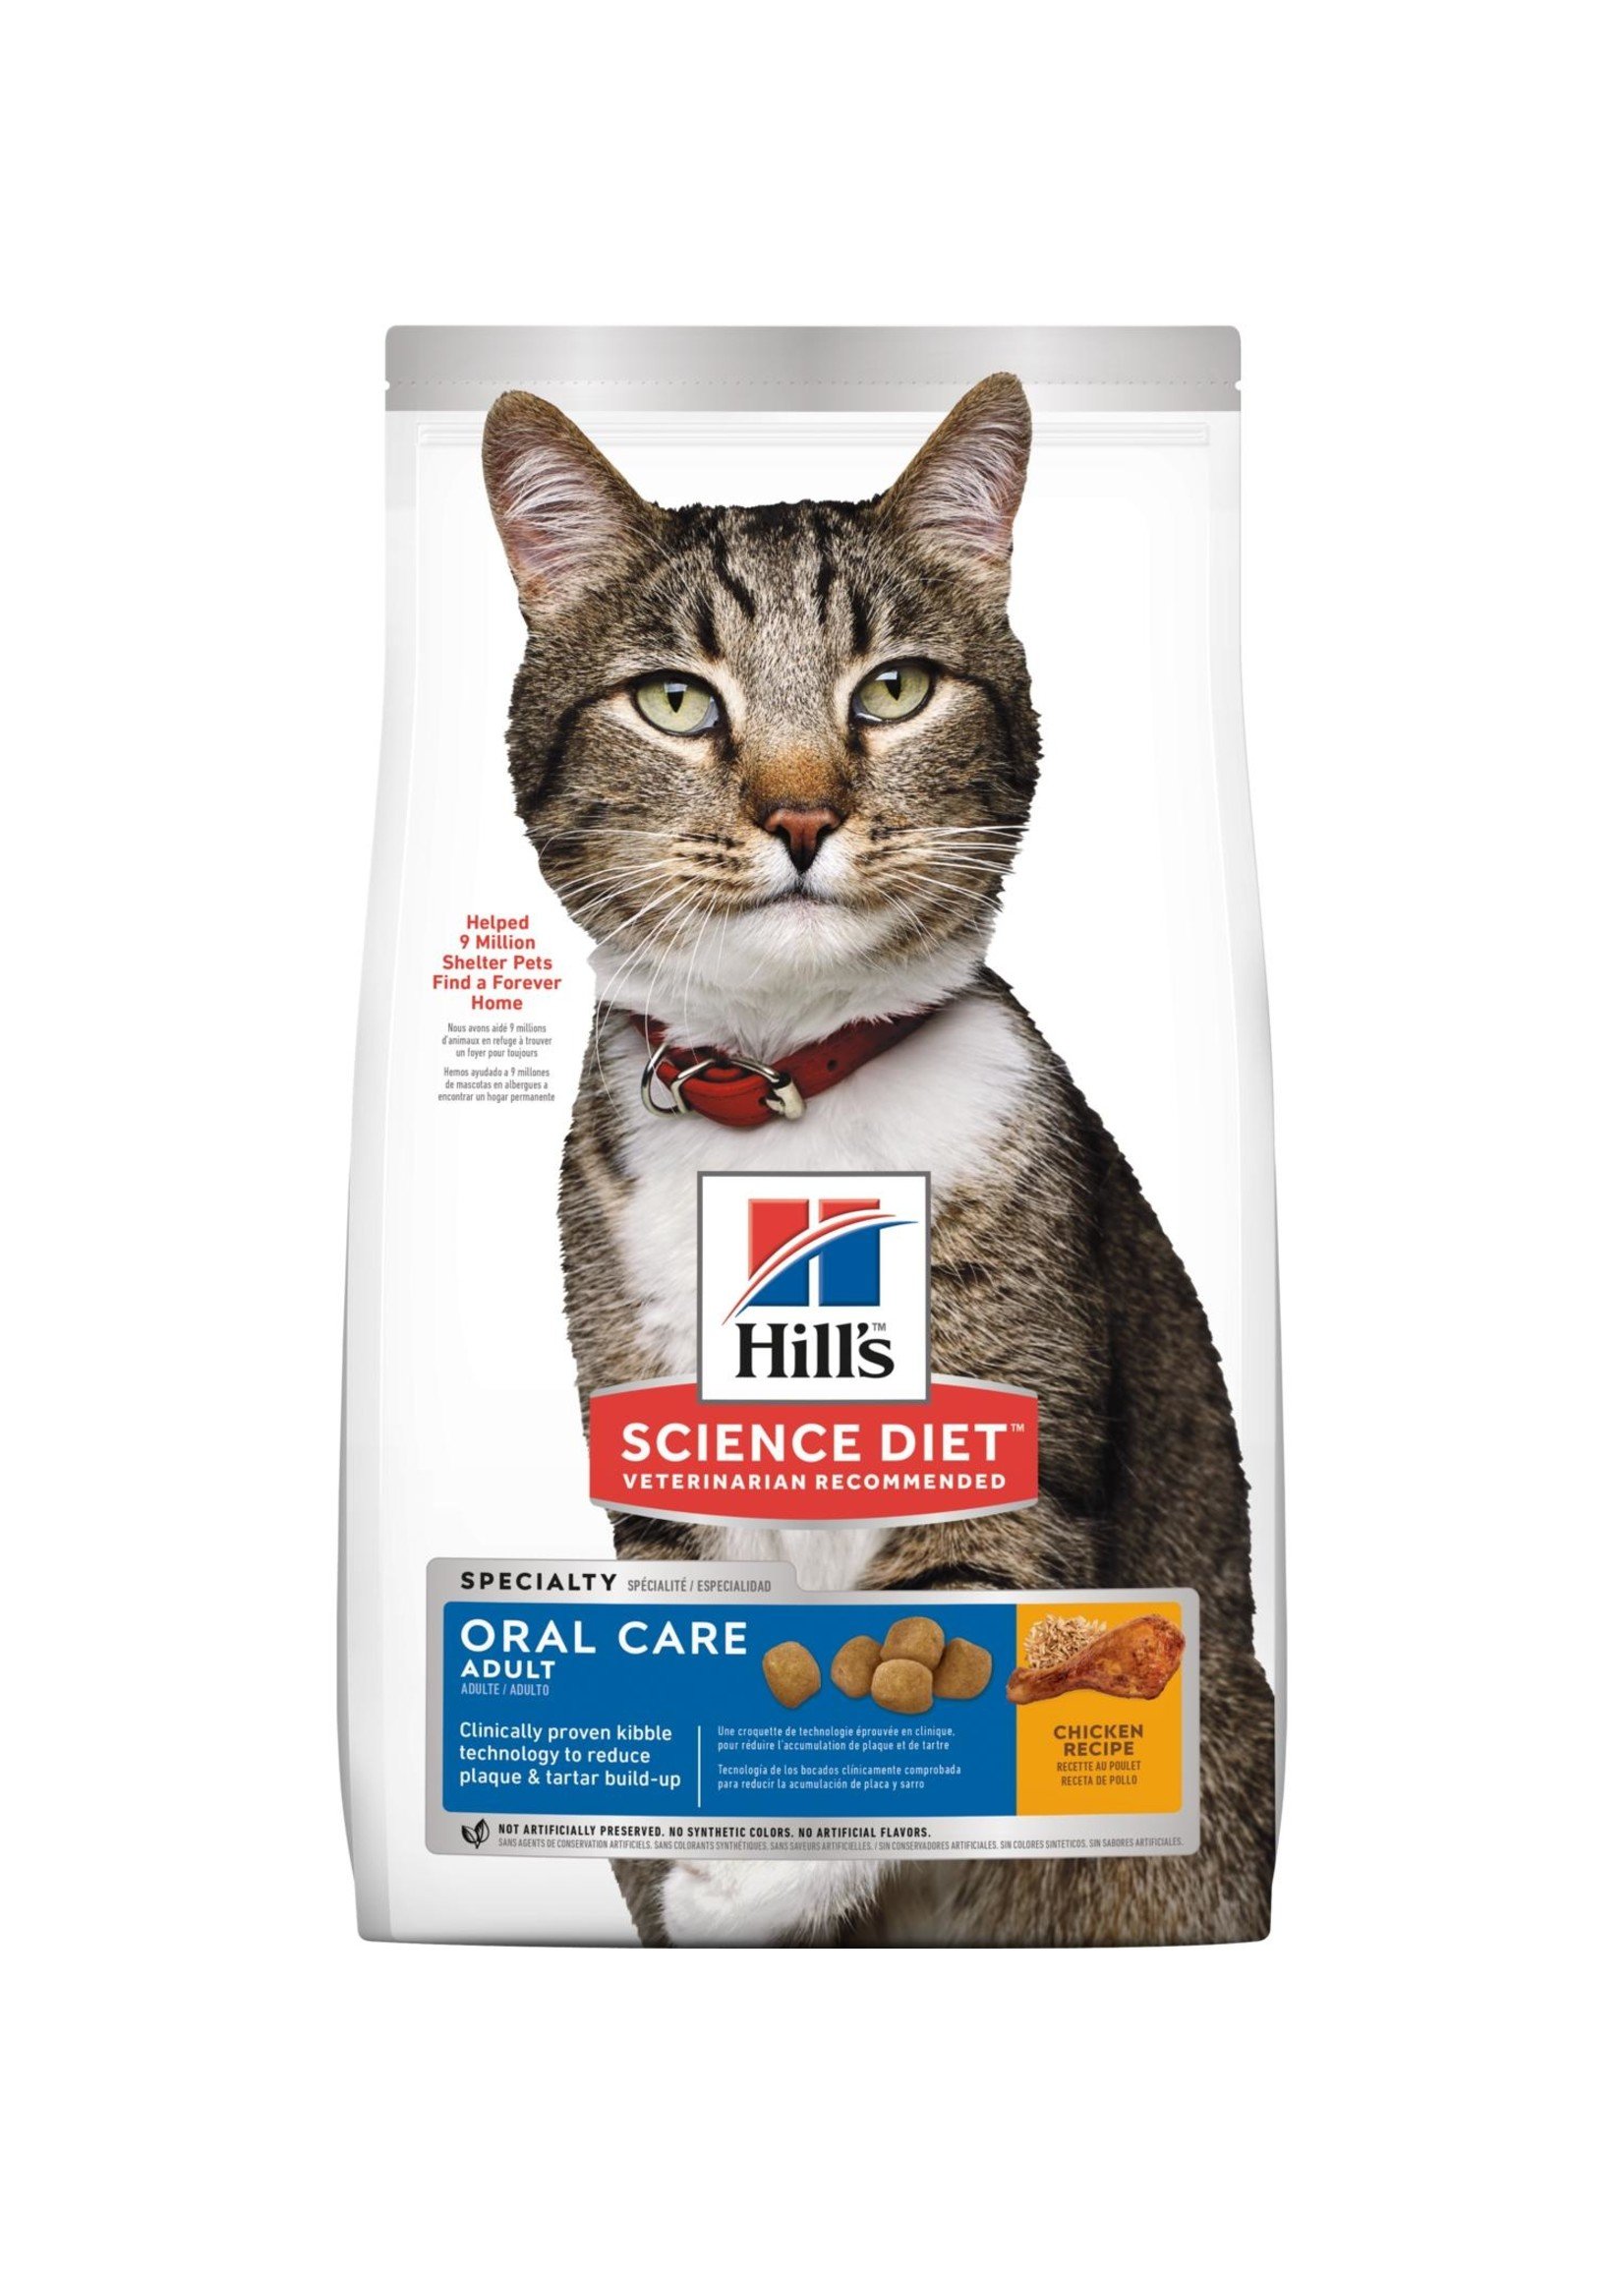 Hill's Science Diet Hill's Science Diet Adult Oral Care Dry Cat Food, Chicken Recipe